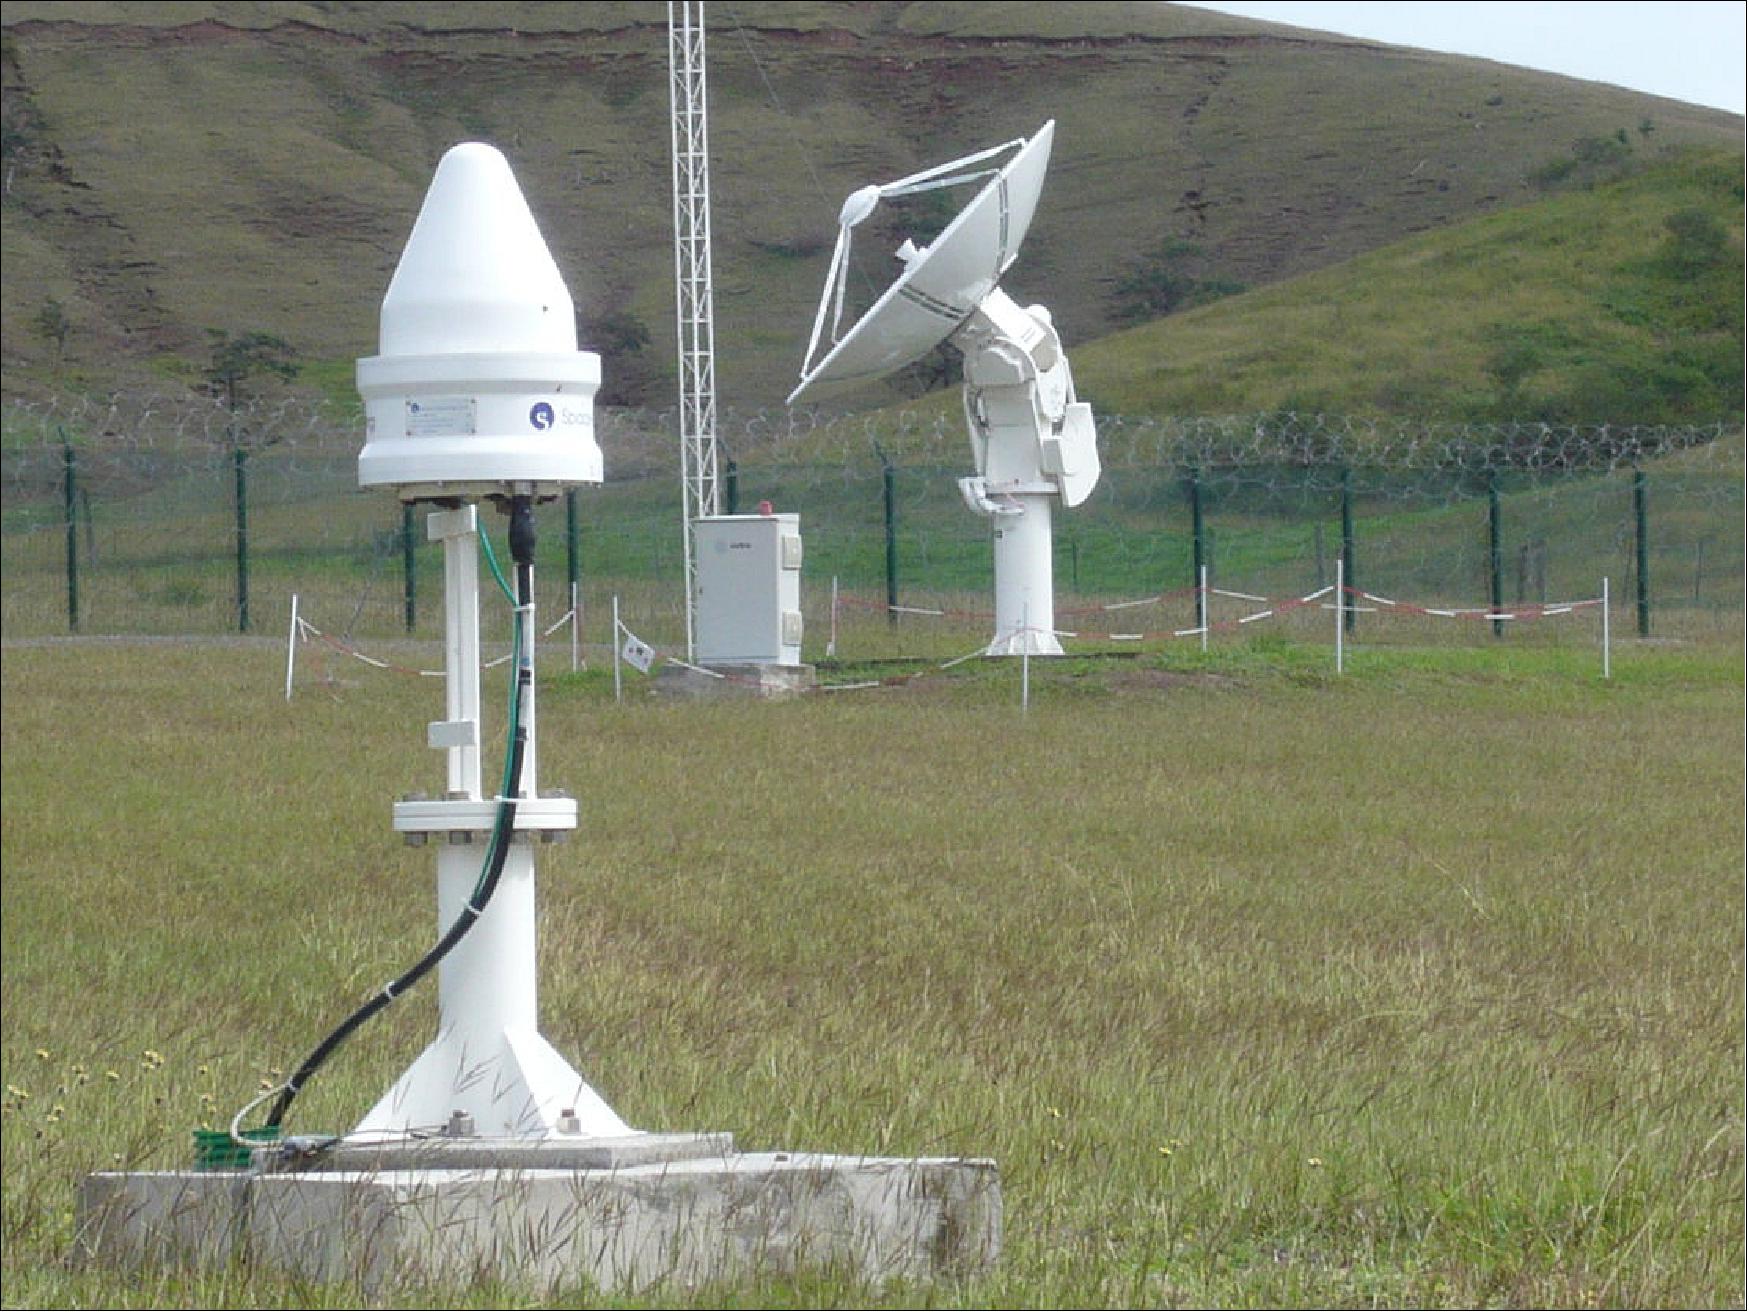 Figure 113: The Galileo ground station near New Caledonia capital Nouméa incorporates a Galileo Sensor Station (foreground) that monitors the quality of navigation signals and an Uplink Station (background) to relay navigation corrections to the satellites for rebroadcast to users. An antenna 13 m in diameter for controlling the satellites has also been built, ready to come online later this year (image credit: ESA-Fermin Alvarez Lopez)